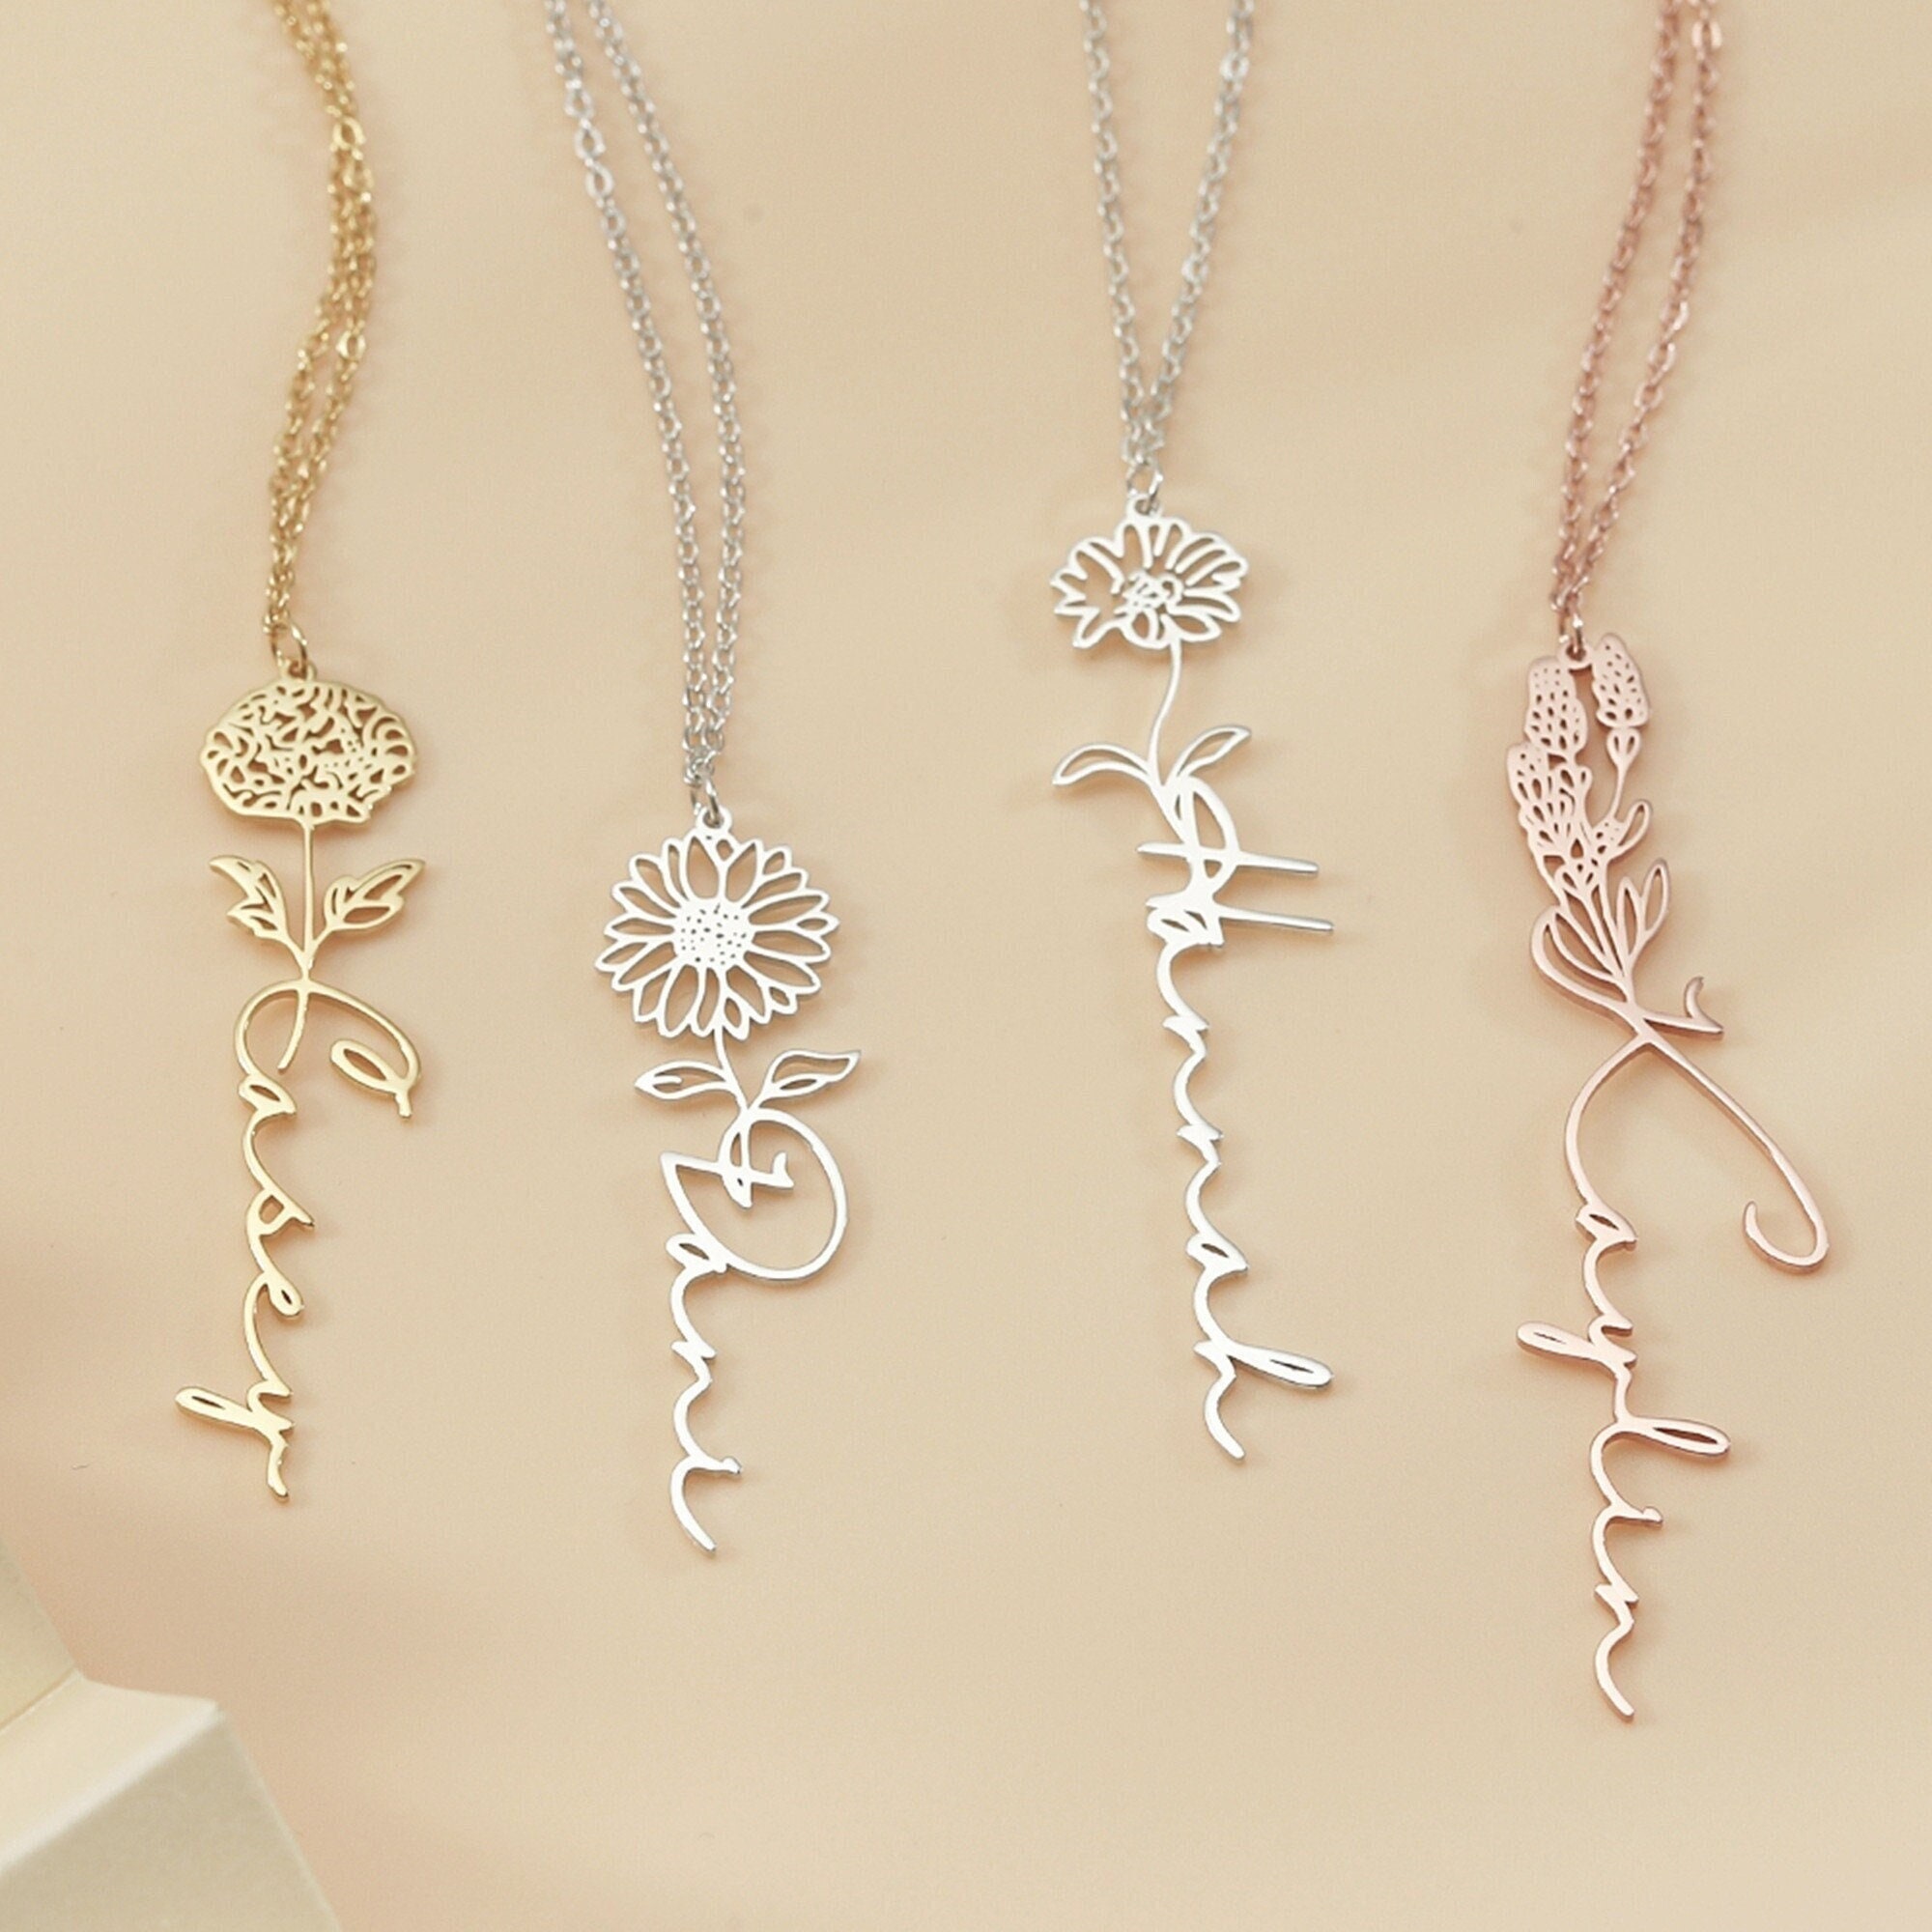  Personalized Interlocking Monogram Necklace Silver or Gold or  Rose Gold color : Handmade Products